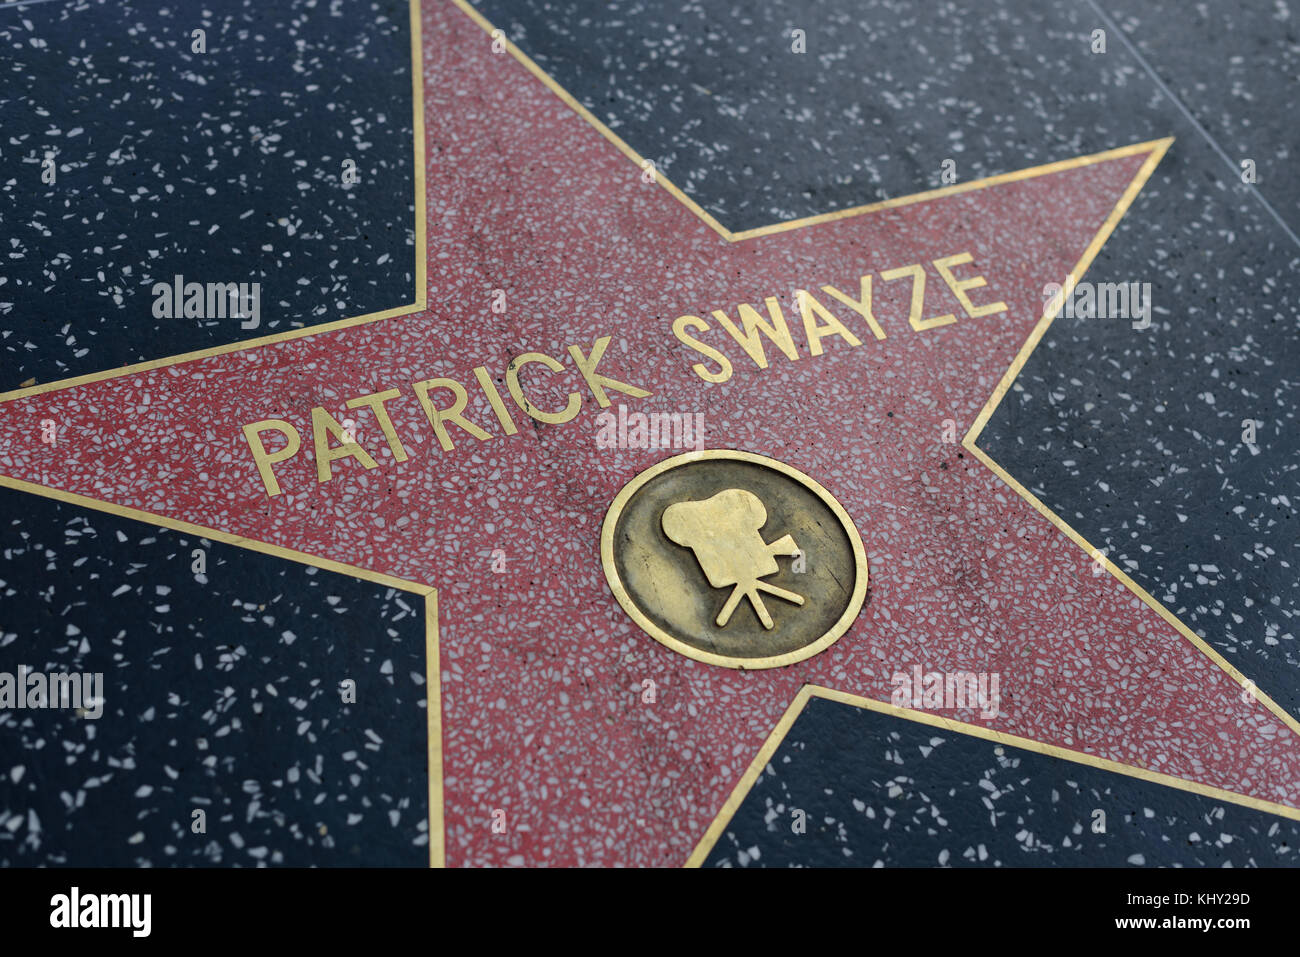 HOLLYWOOD, CA - DECEMBER 06: Patrick Swayze star on the Hollywood Walk of Fame in Hollywood, California on Dec. 6, 2016. Stock Photo